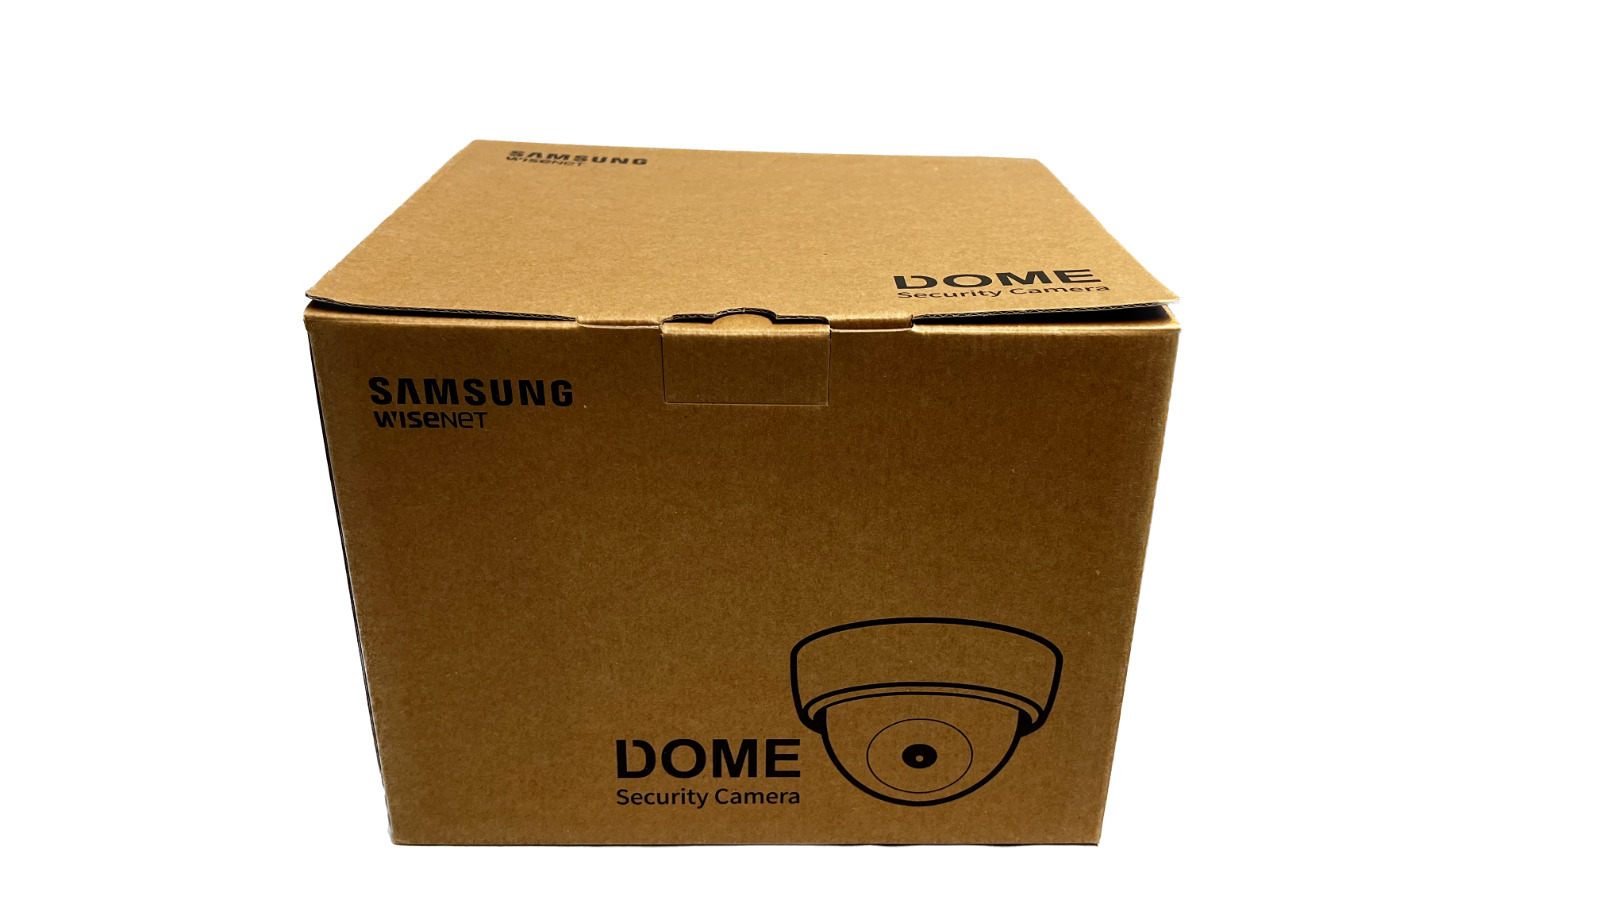 Samsung WiseNET SNV-7084RN 3Mp 3-8.5Mm Lens Network Dome Security Camera